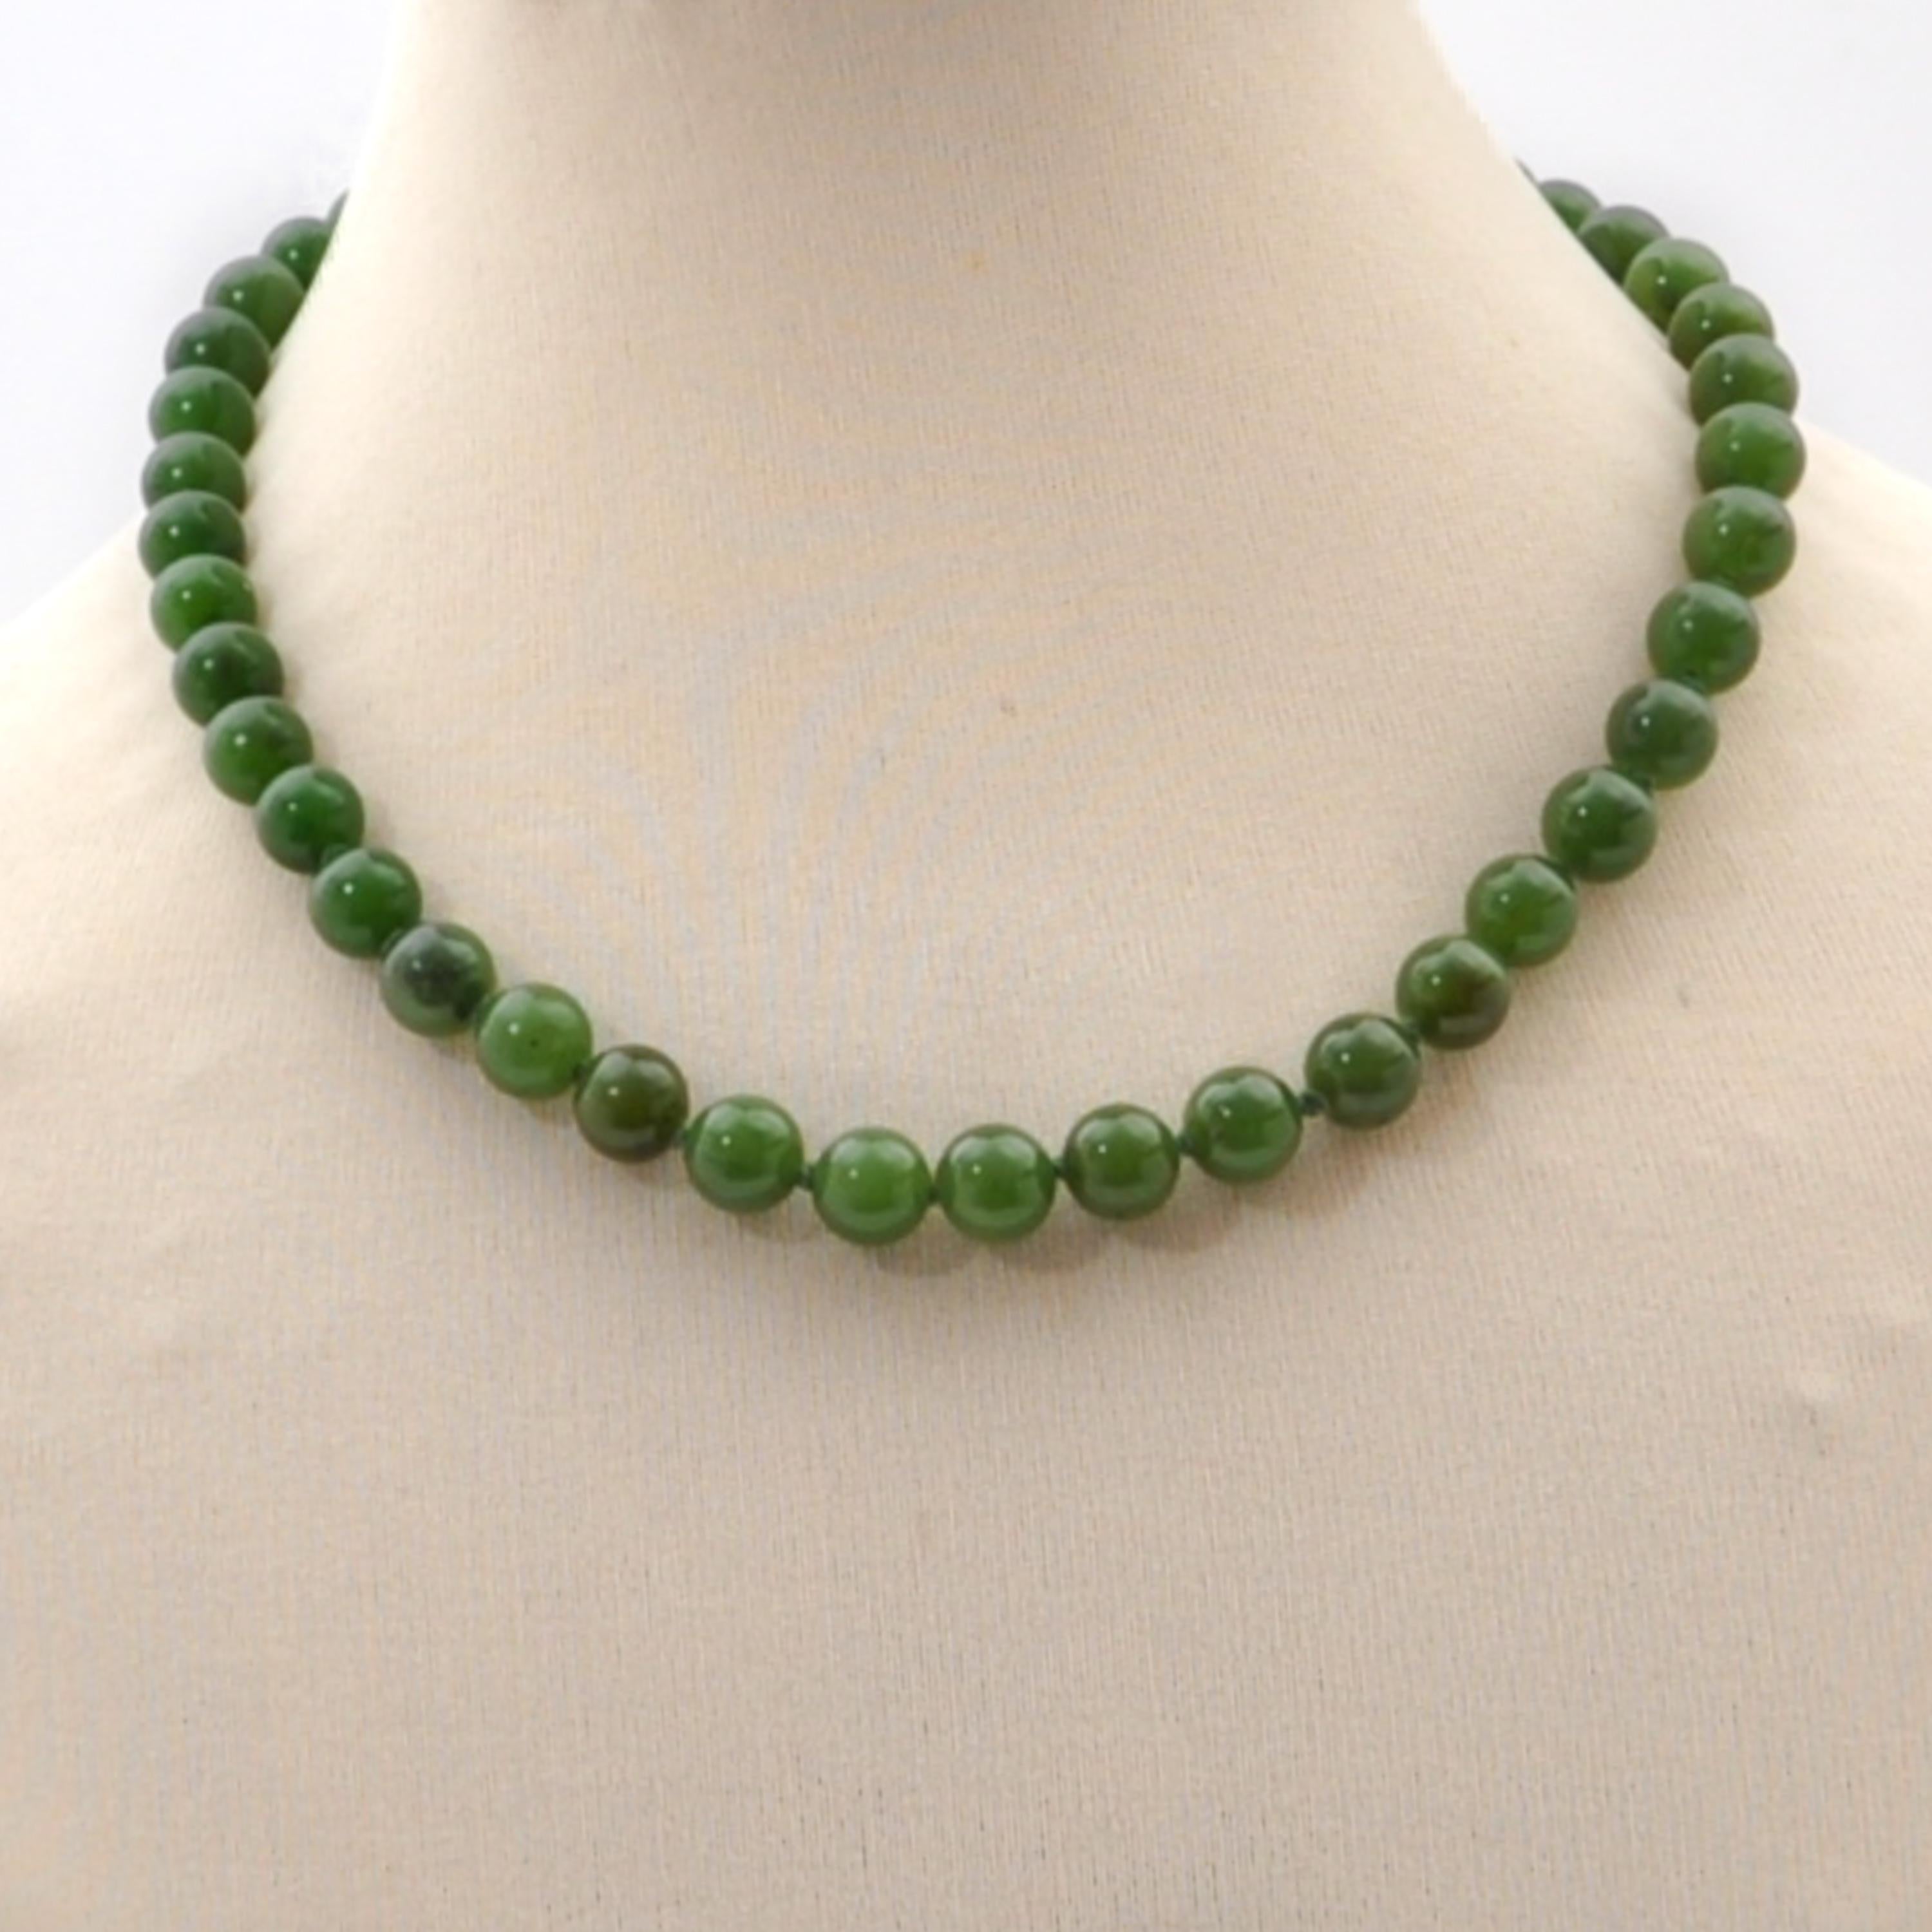 A vintage green nephrite jade beaded necklace made of one single-strand. The necklace consists of round-shaped nephrite jade stones. The jade beads have a nice green color and are equally sized. To keep some space between the beads, the thread is